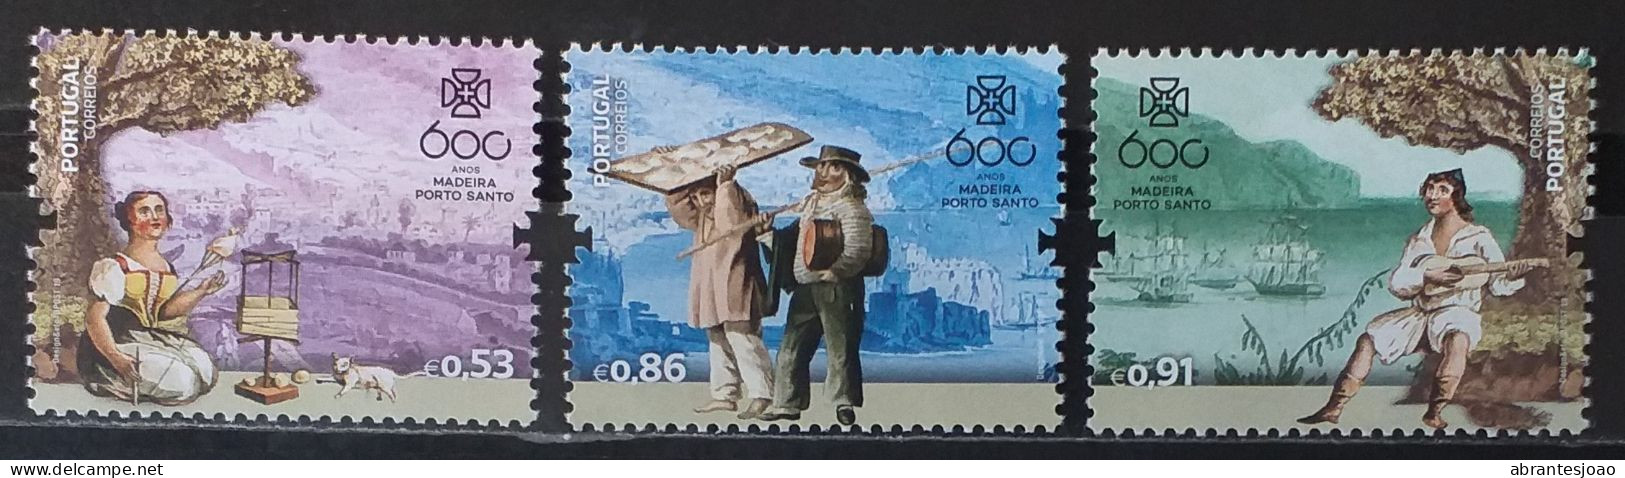 2019 - Portugal - MNH - 600 Years Since Discovery Of Madeira - 3 Stamps - Nuovi